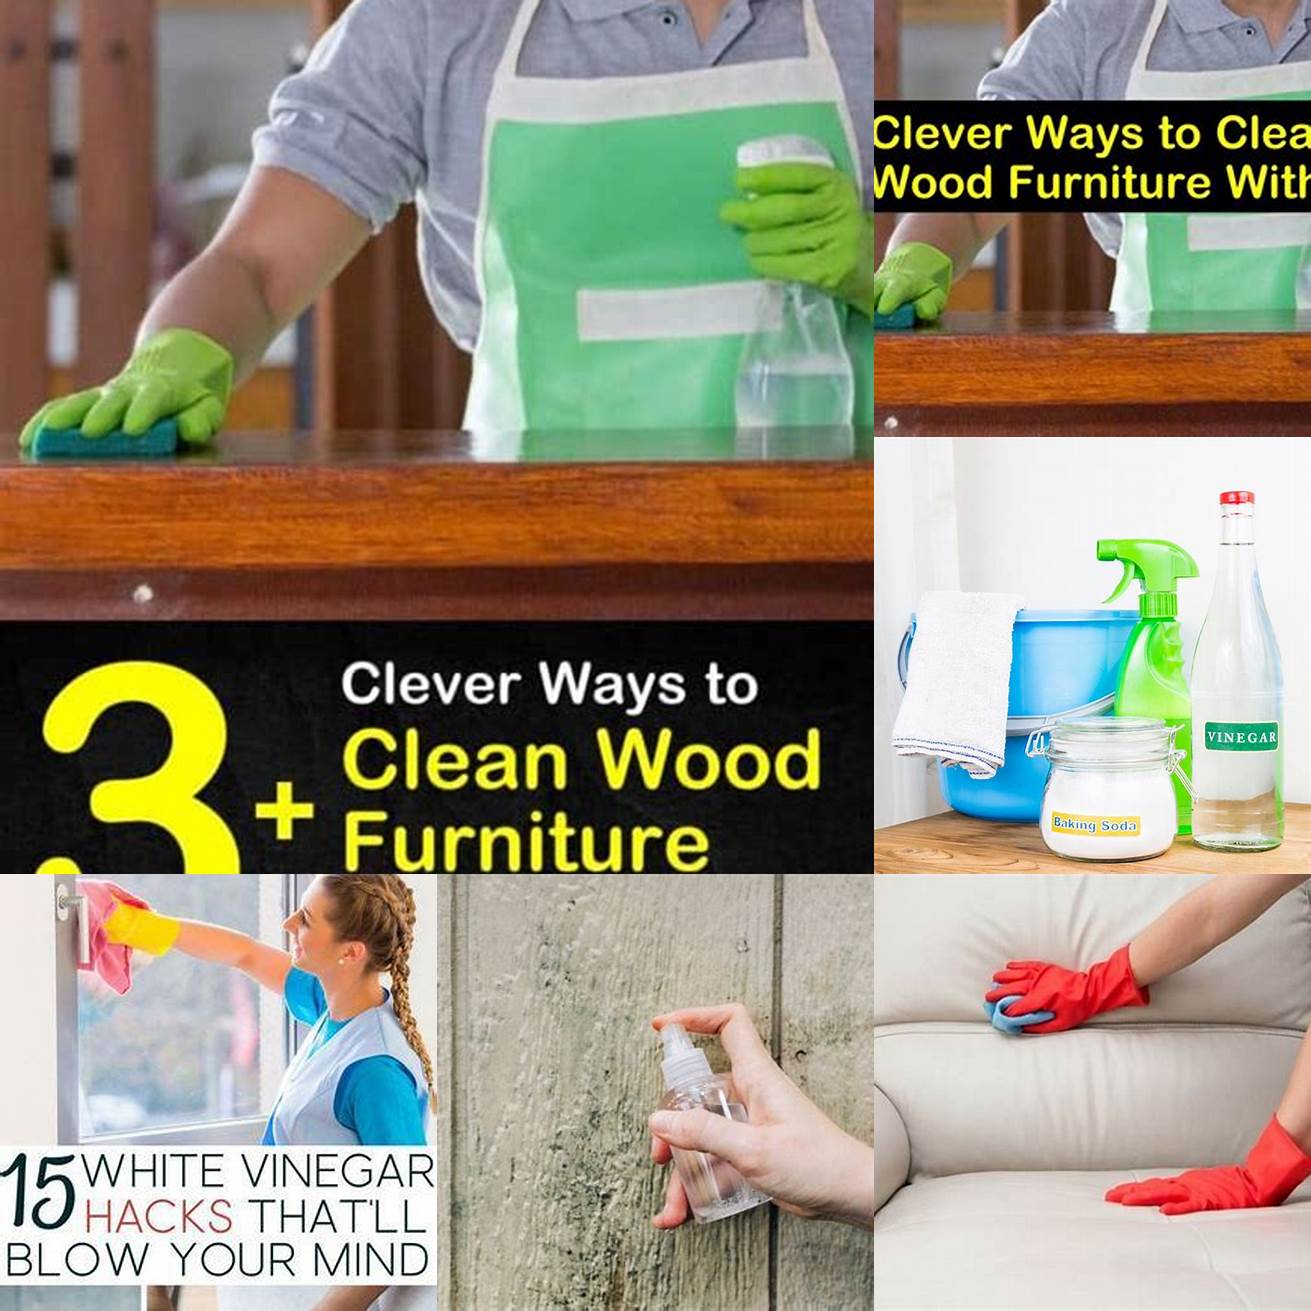 Clean the furniture with white vinegar